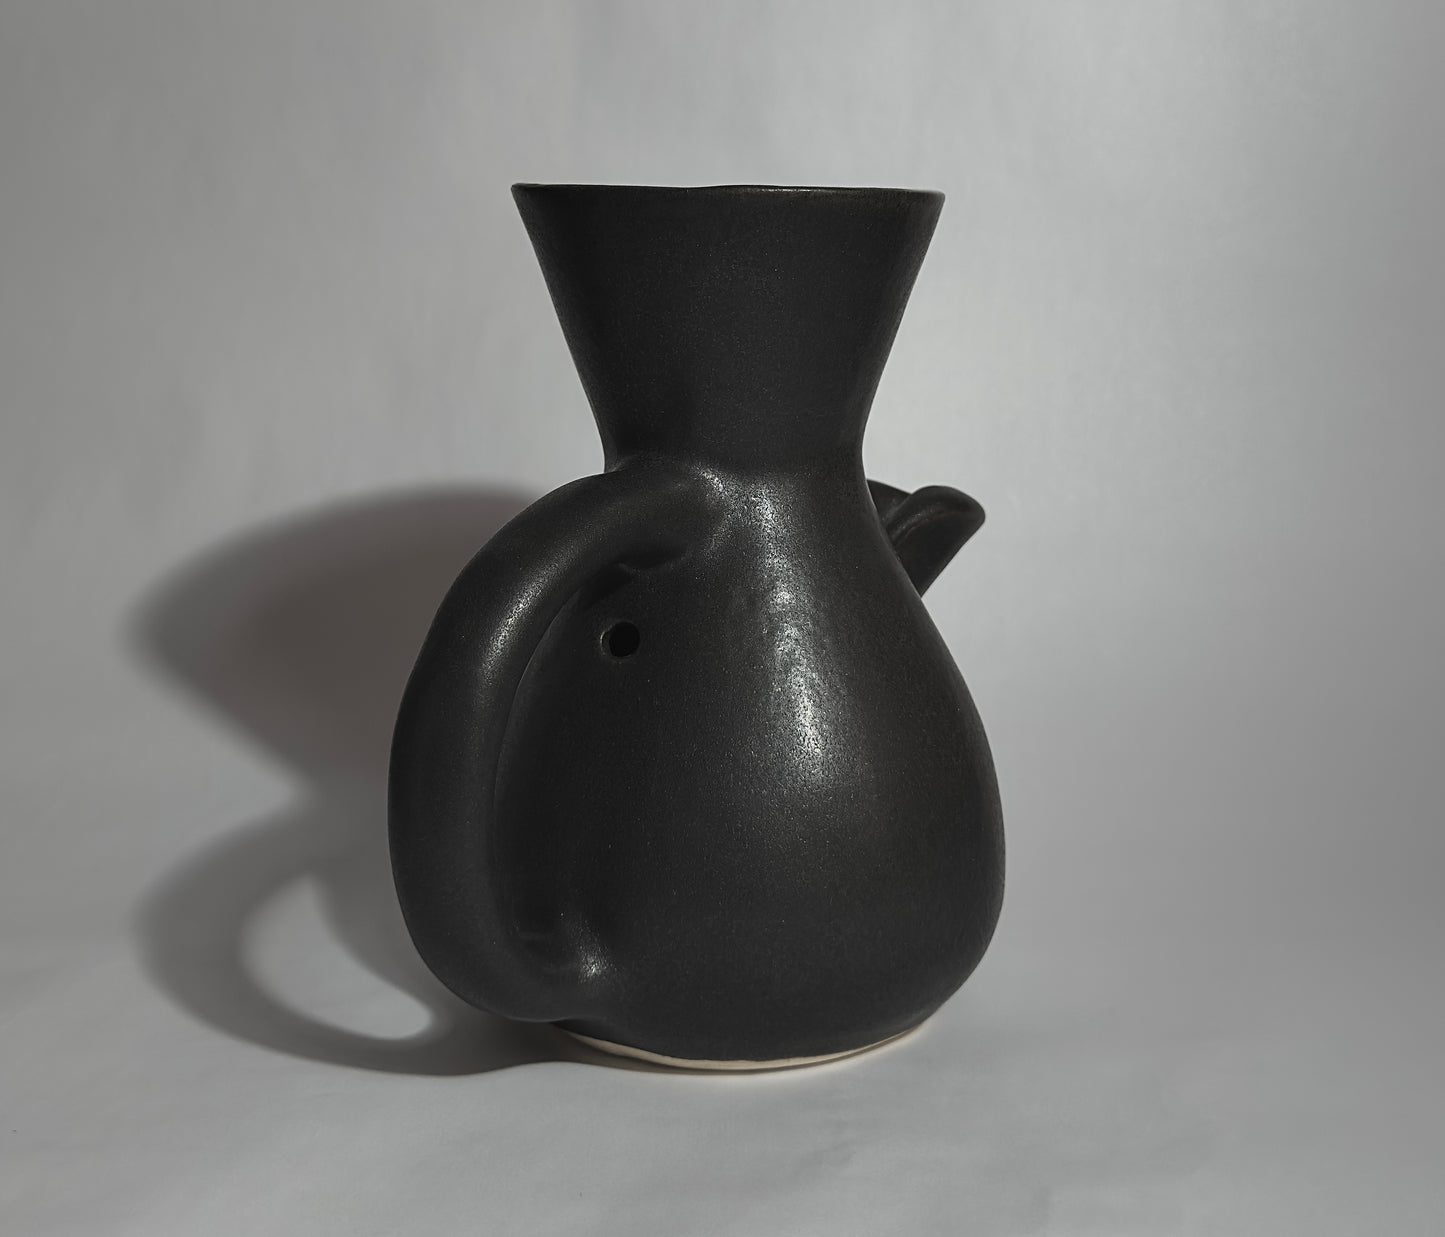 "The Kápi Coffee Maker, a handcrafted clay pot from Costa Rica, with a matte black finish. Its elegant, simple design features a flared top, sturdy handle, and a distinctive oxygenation hole for enhancing the coffee's flavor. The artisanal craftsmanship is evident in the pot's textured surface and organic shape, embodying a blend of tradition and functionality in its compact form."